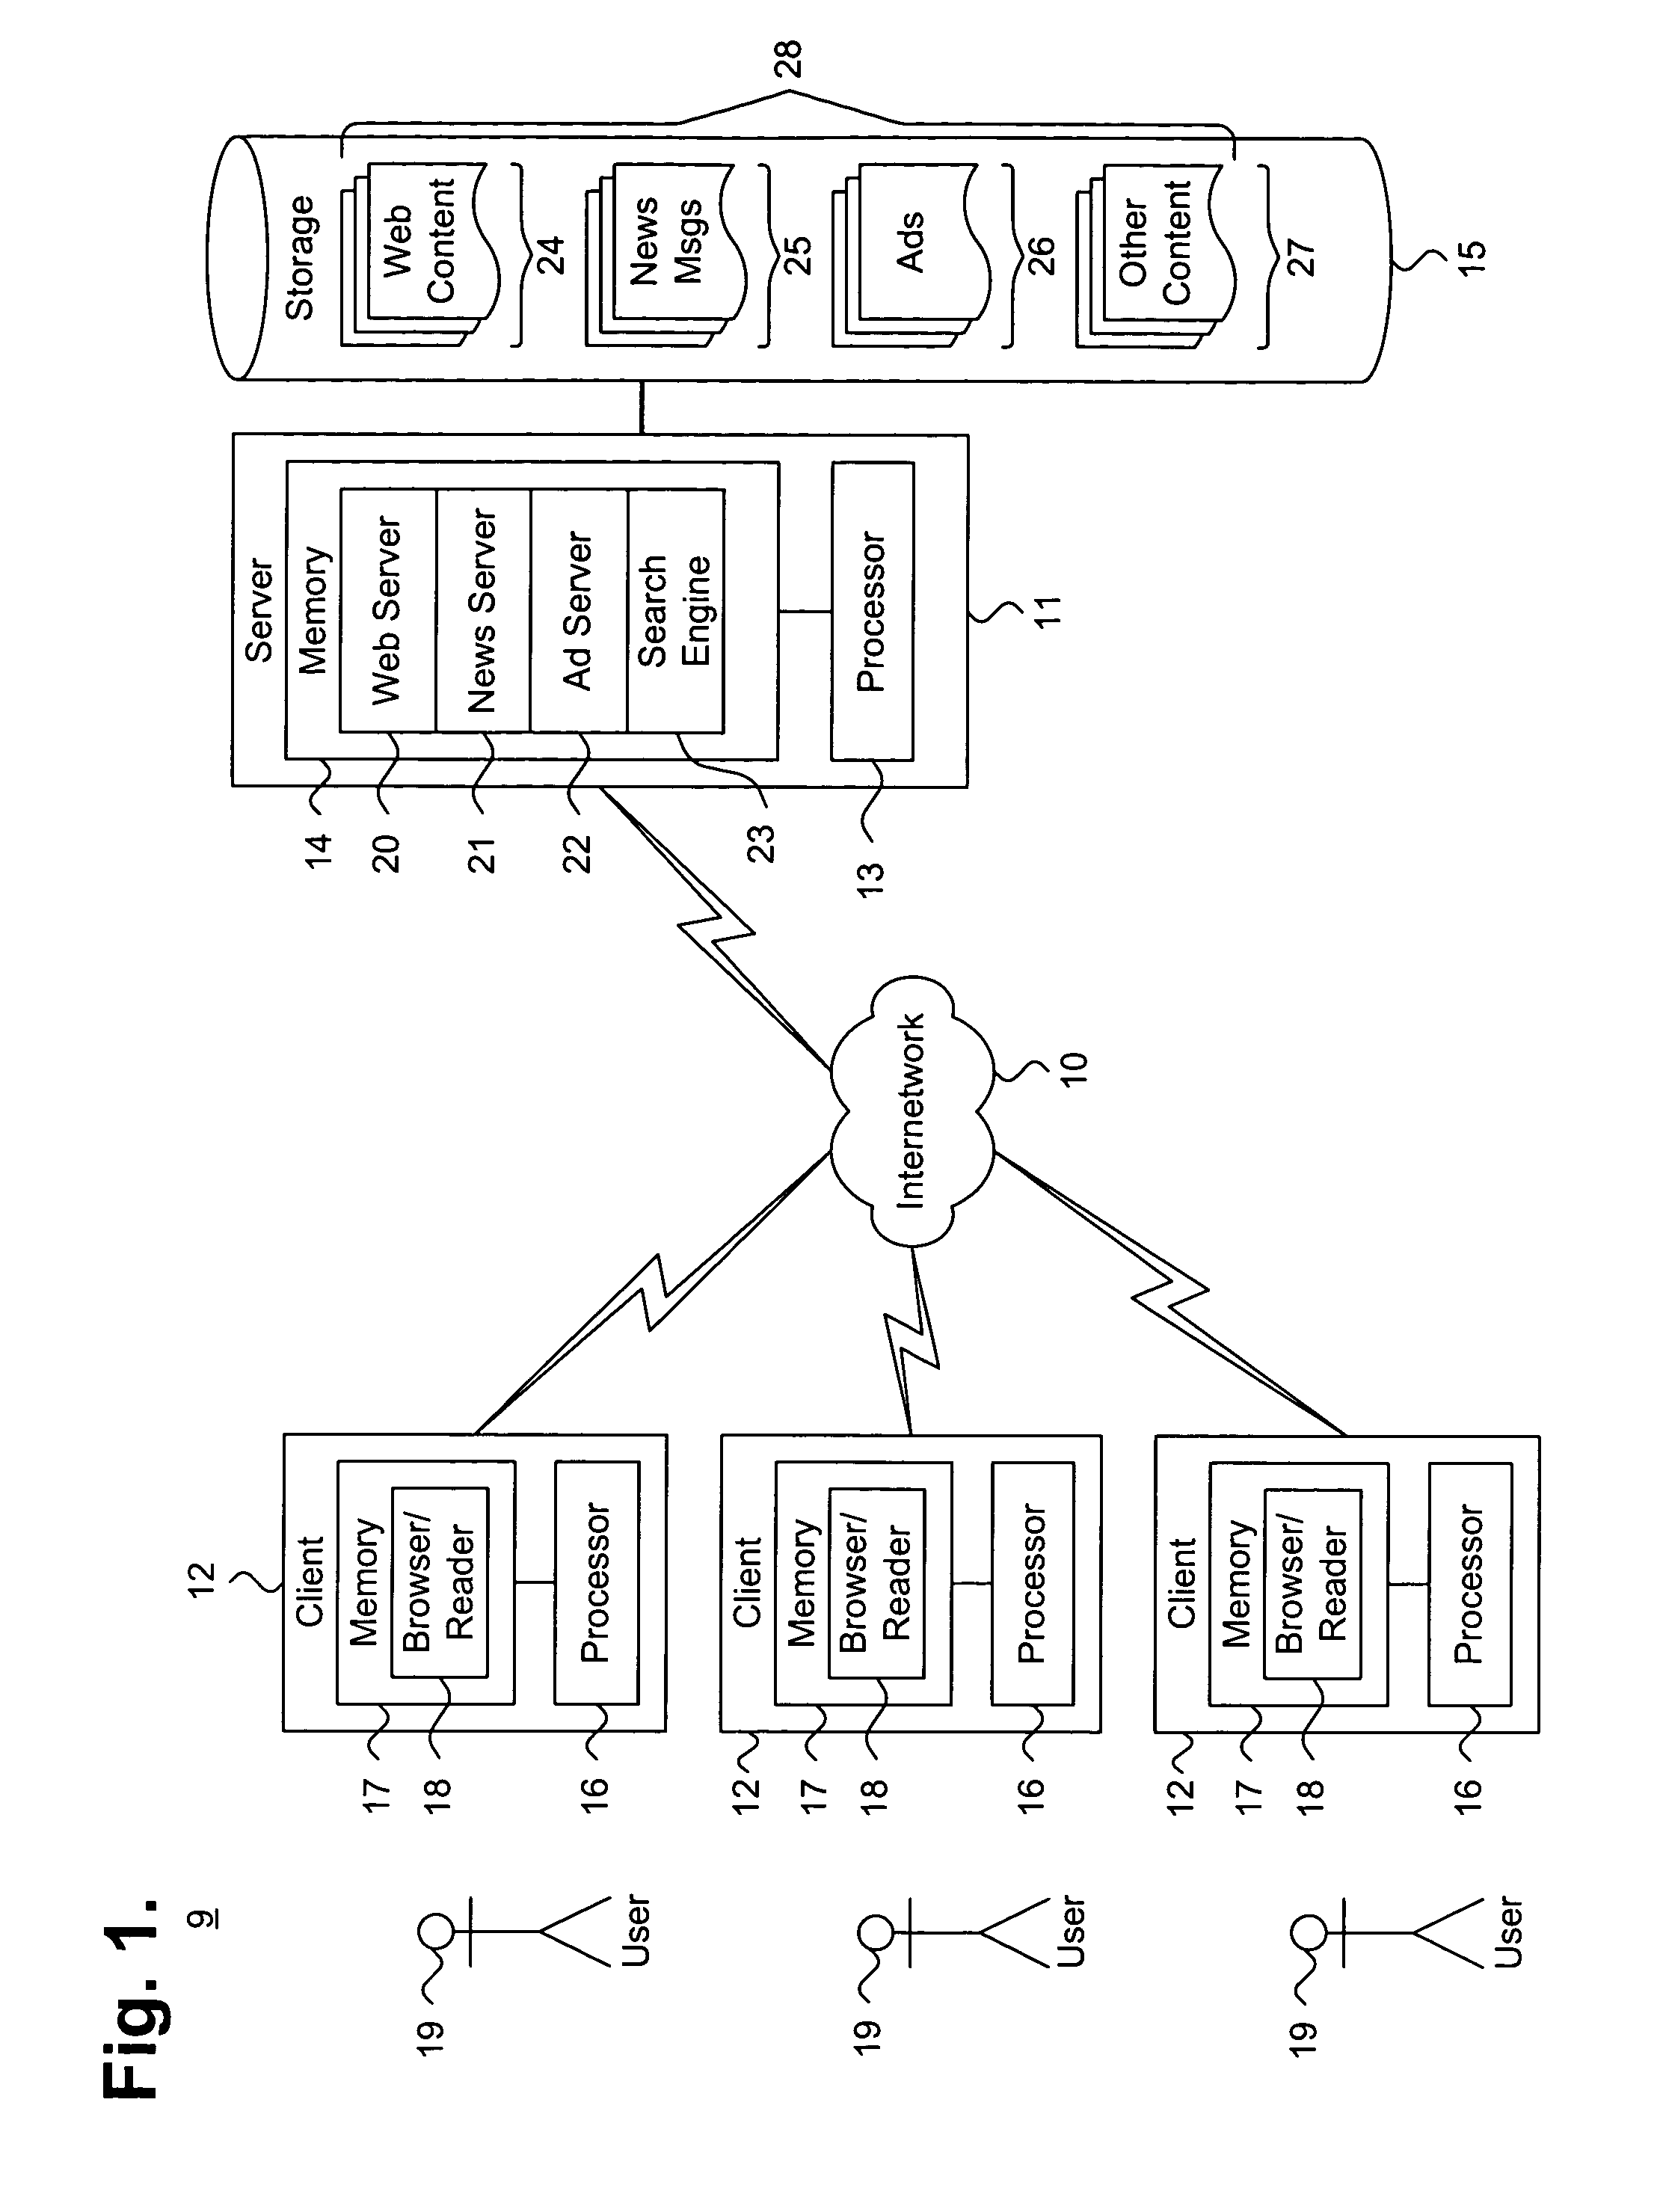 System and method for determining a composite score for categorized search results